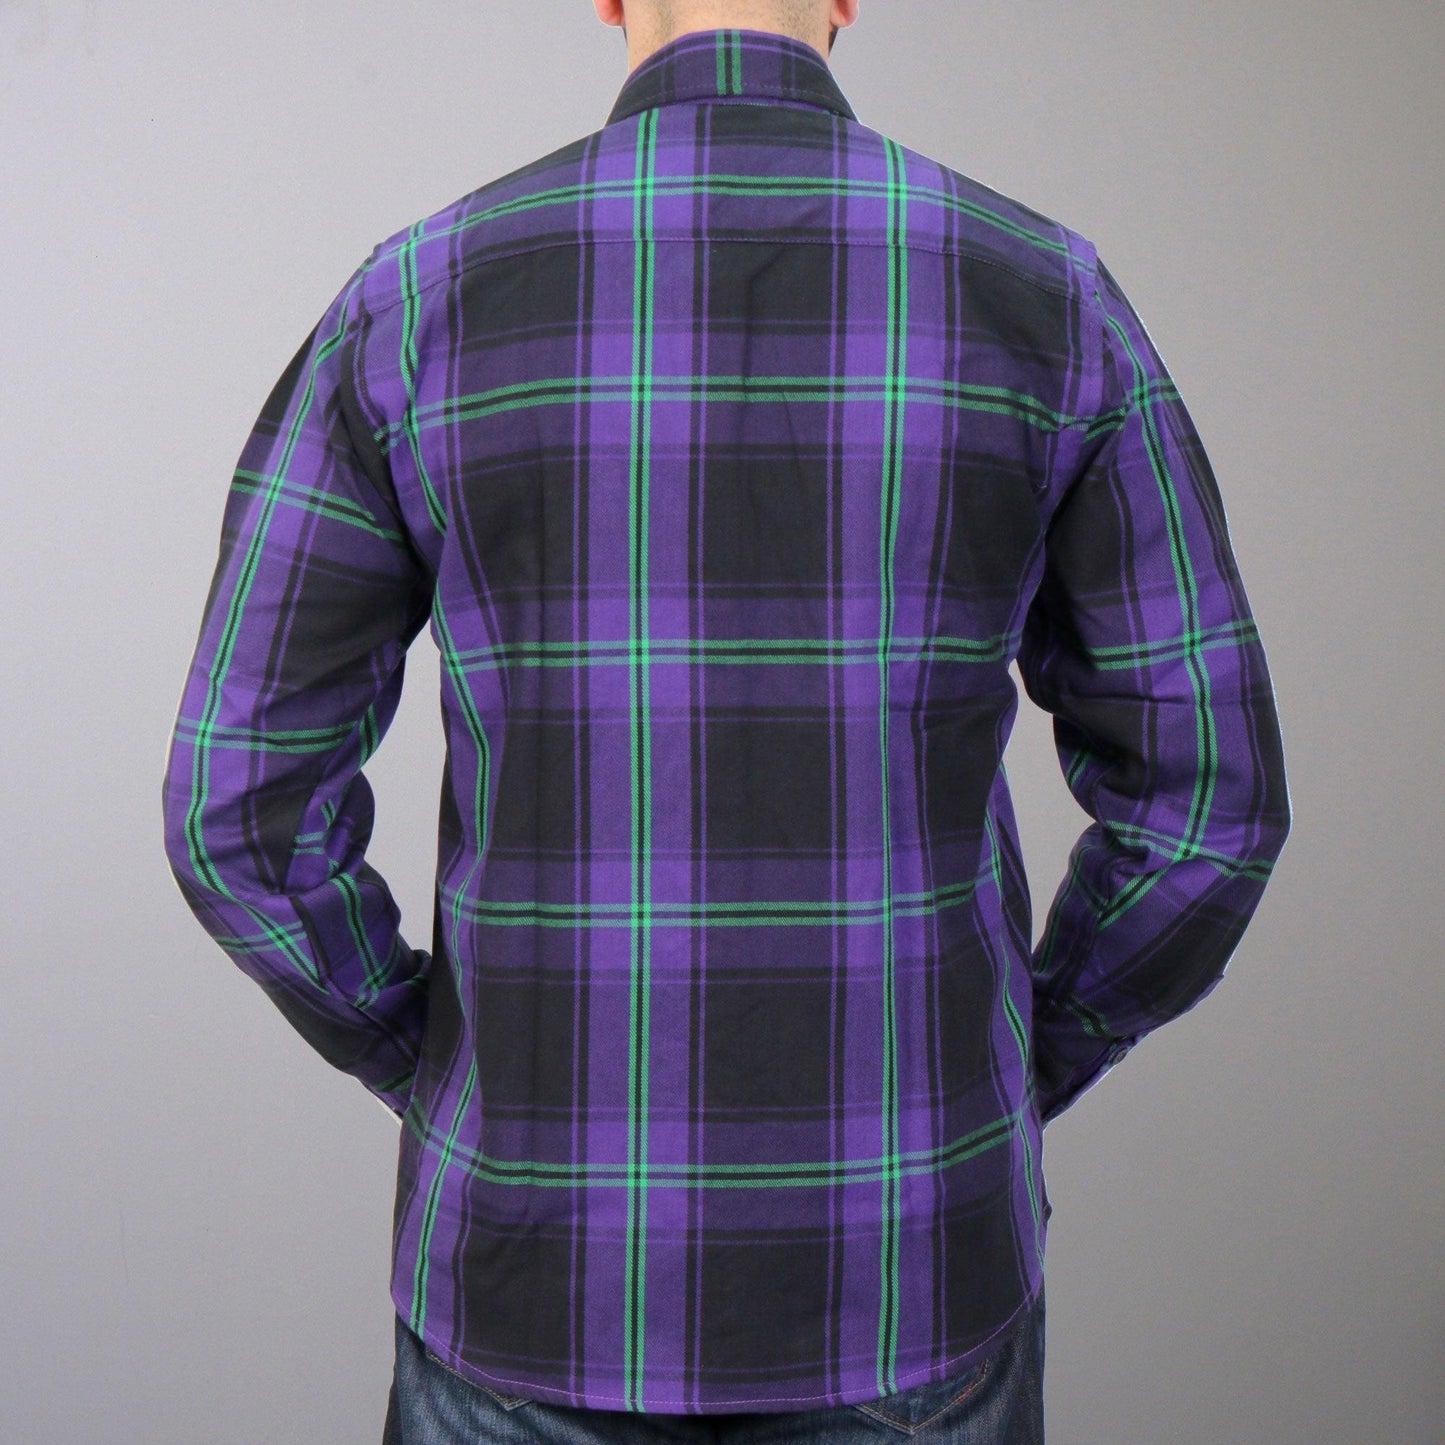 Long Sleeve Voodoo Flannel Shirt for Men - Military Republic